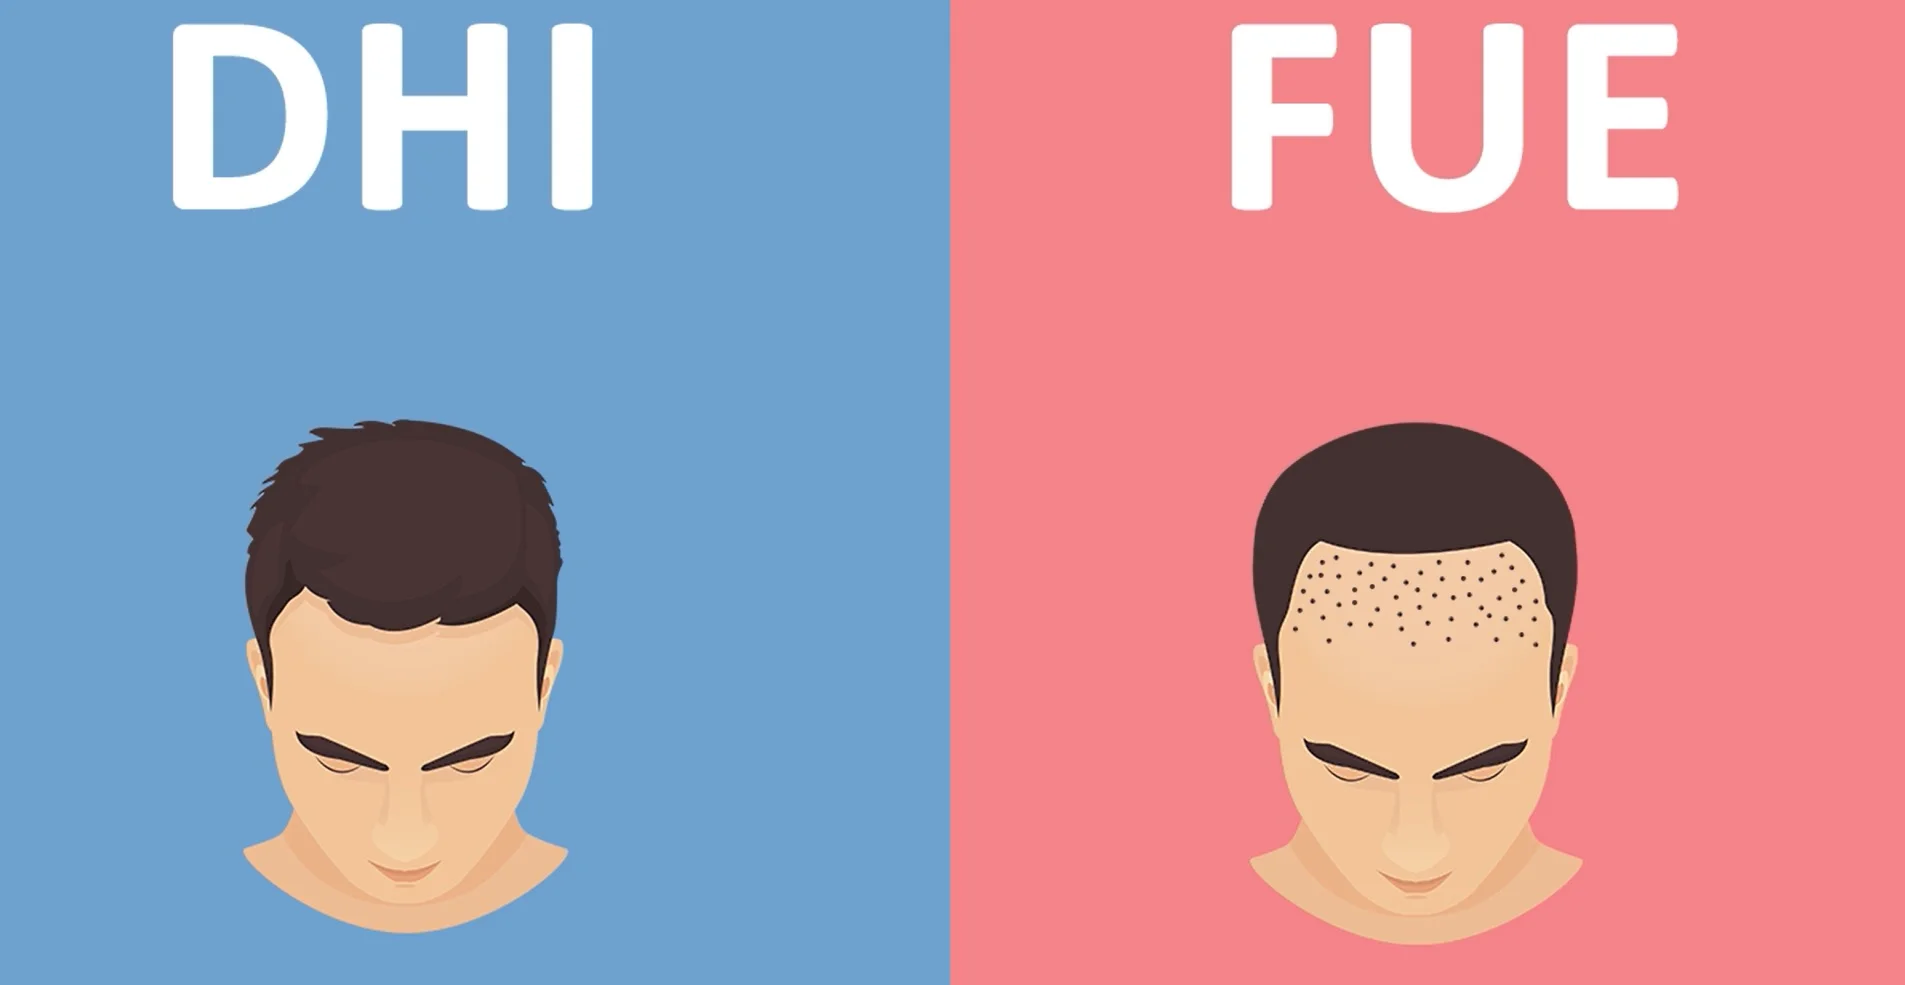 What's the difference between FUE and DHI